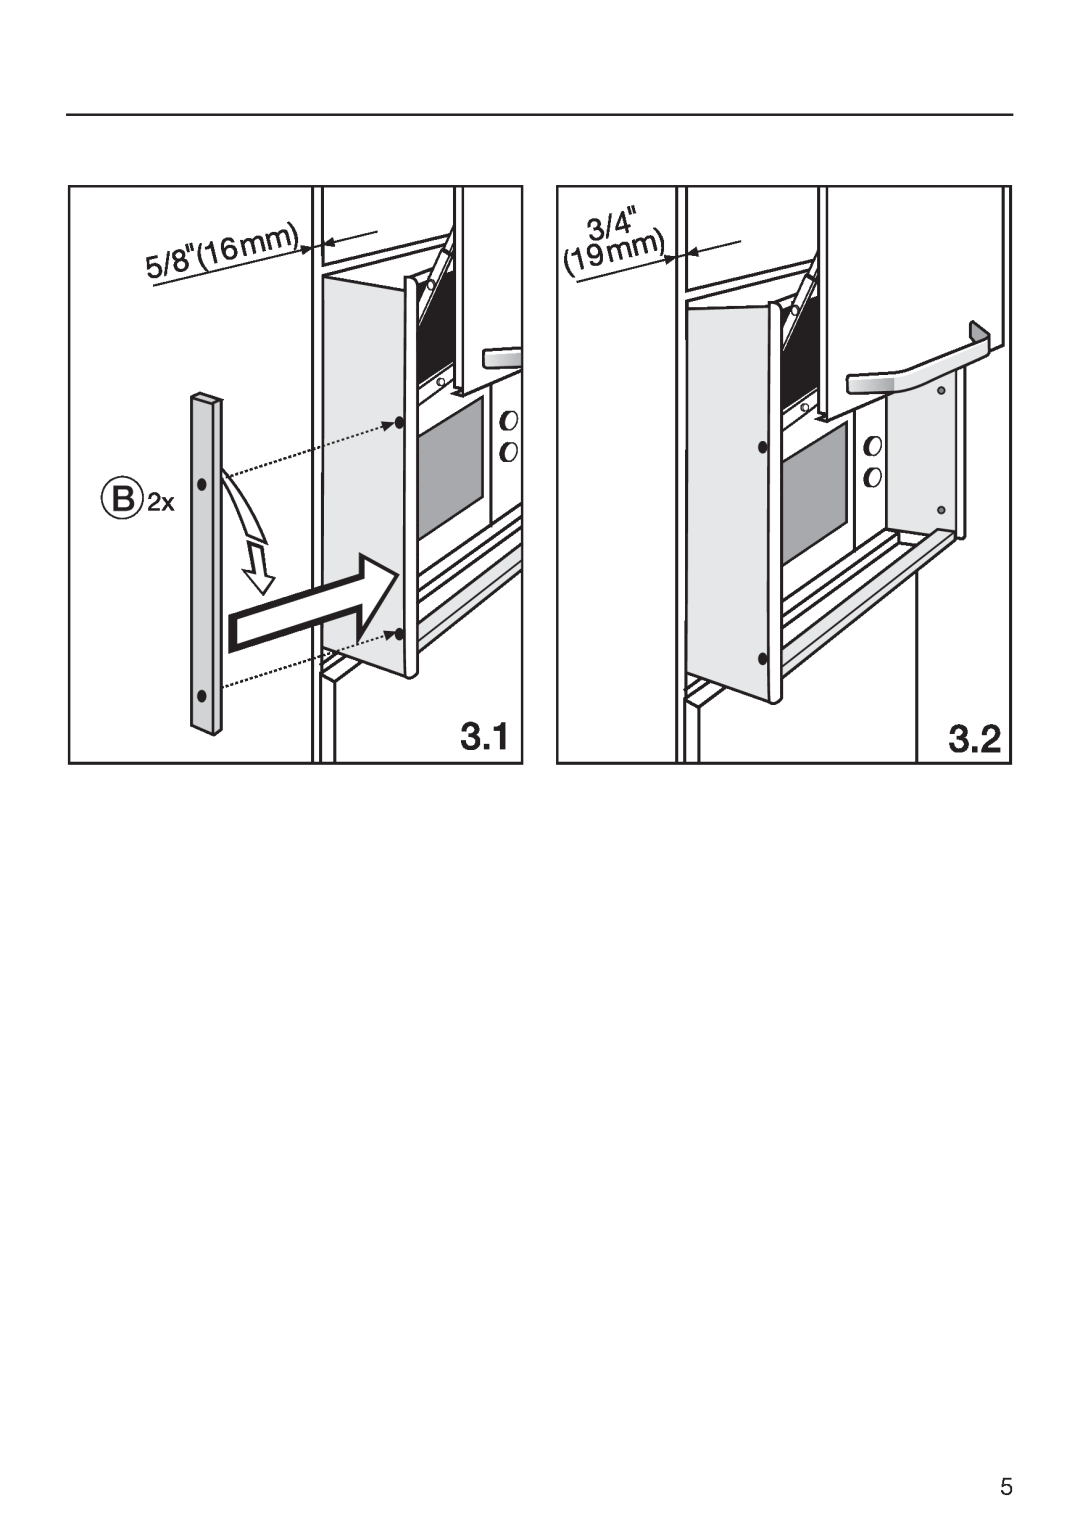 Miele MLT 75 installation instructions 